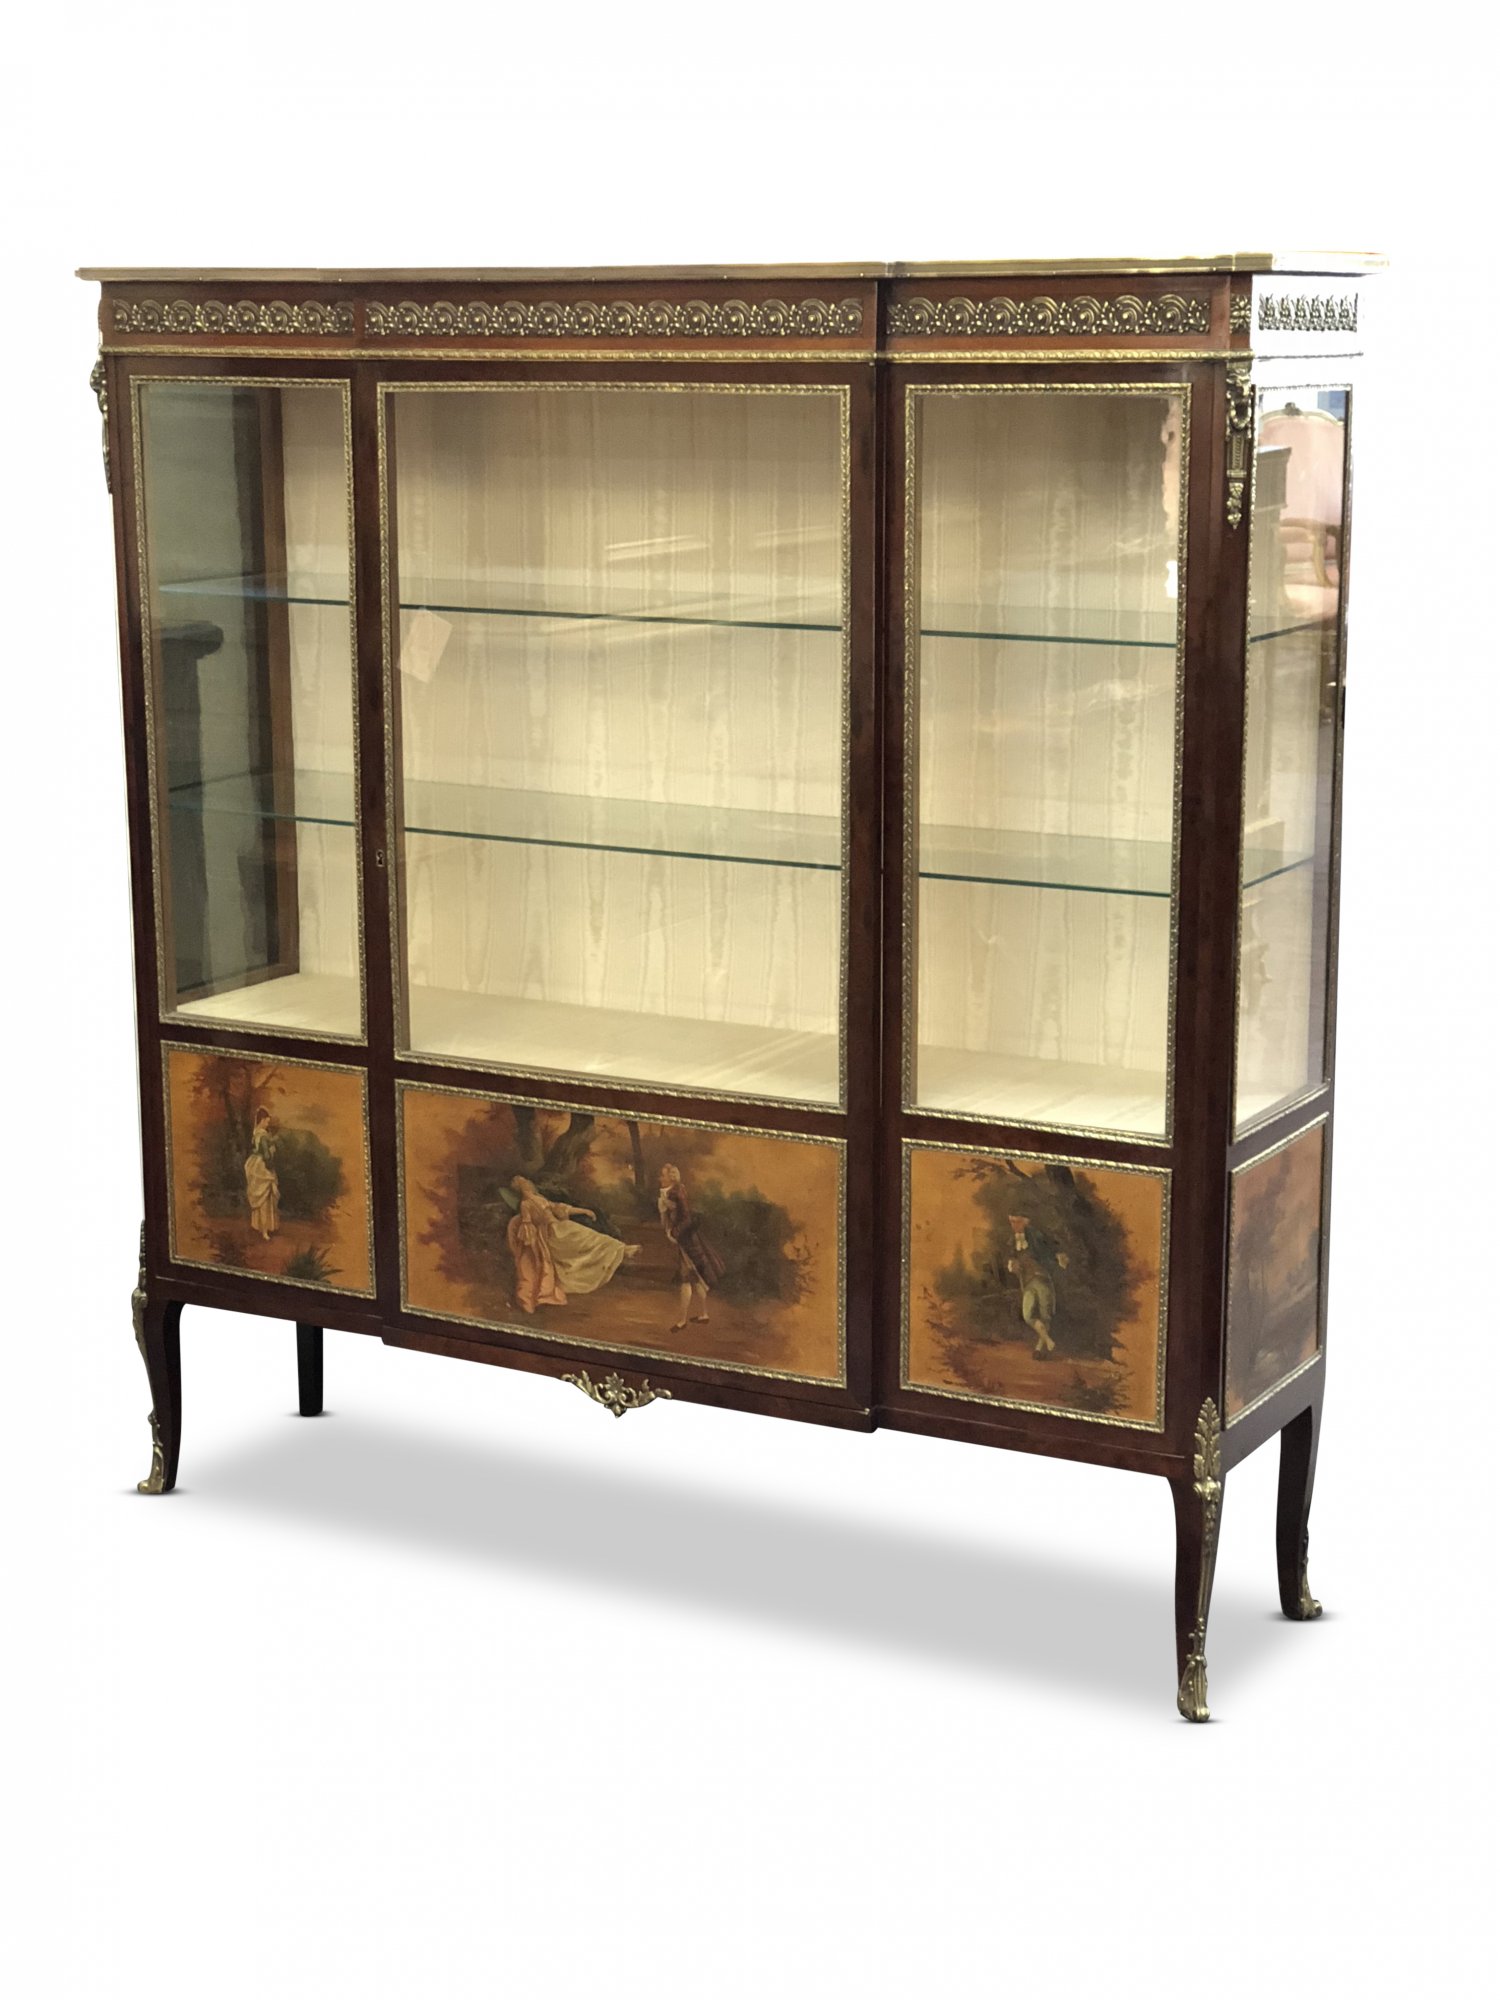 19th Century French Marble Top Breakfront Display Cabinet with Hand Painted Panels, c.1870